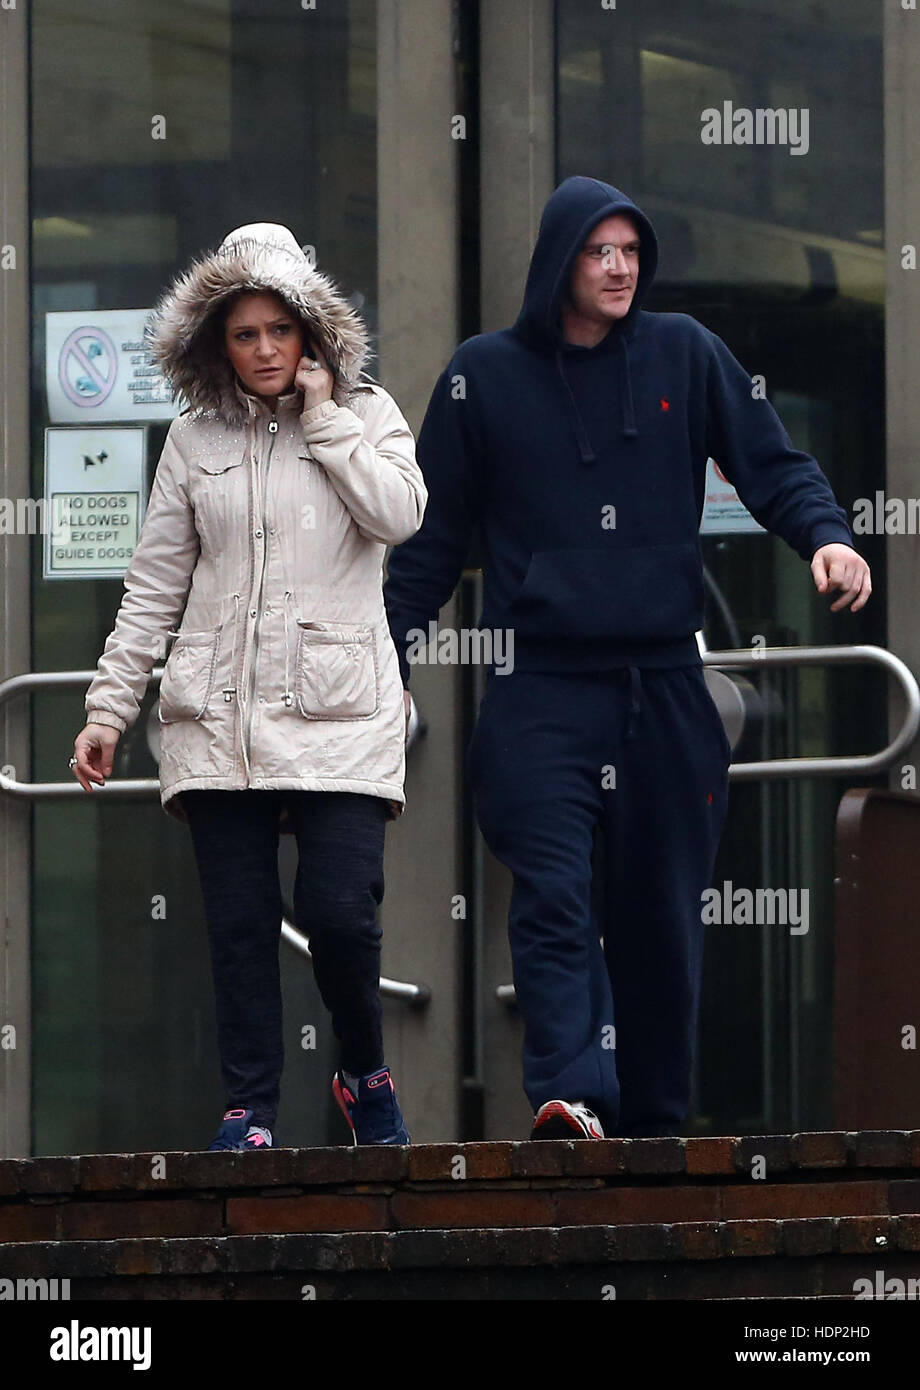 Katherine Cox (left) and Danny Shepherd leave Maidstone Crown Court after appearing charged with causing or allowing the death of a baby. Stock Photo